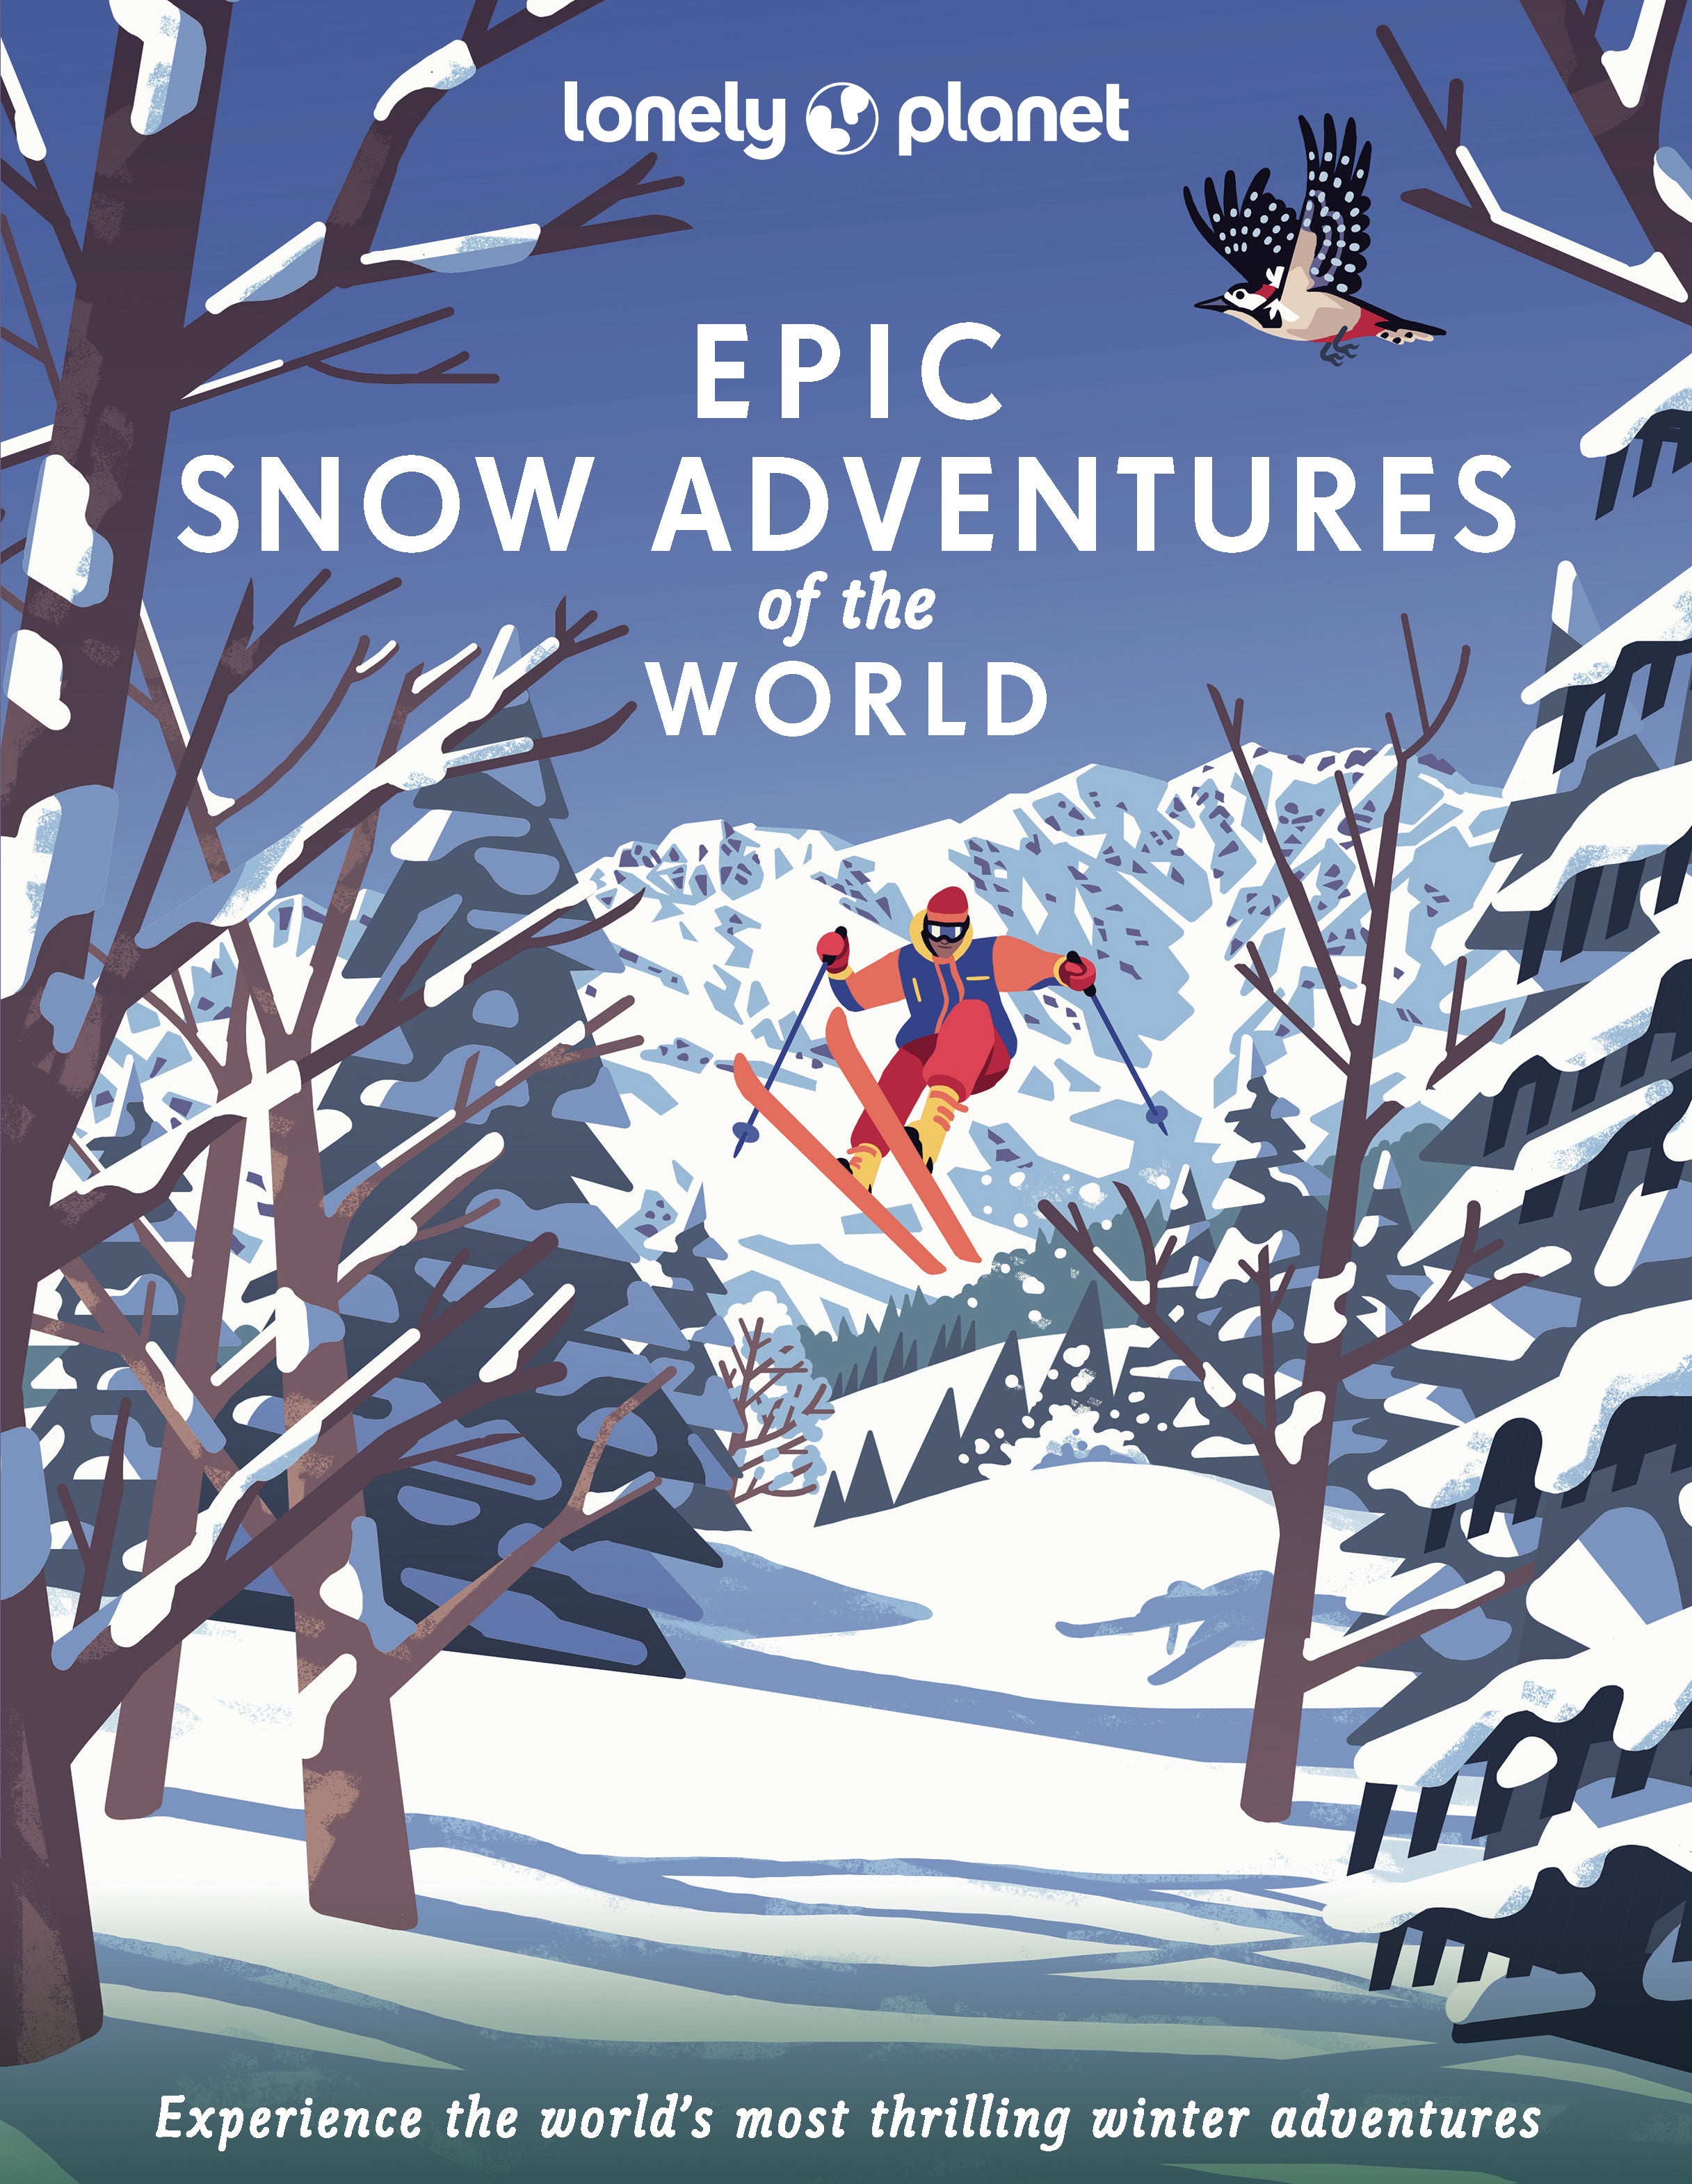 Epic First Run launches today, and introducing the Now On Epic